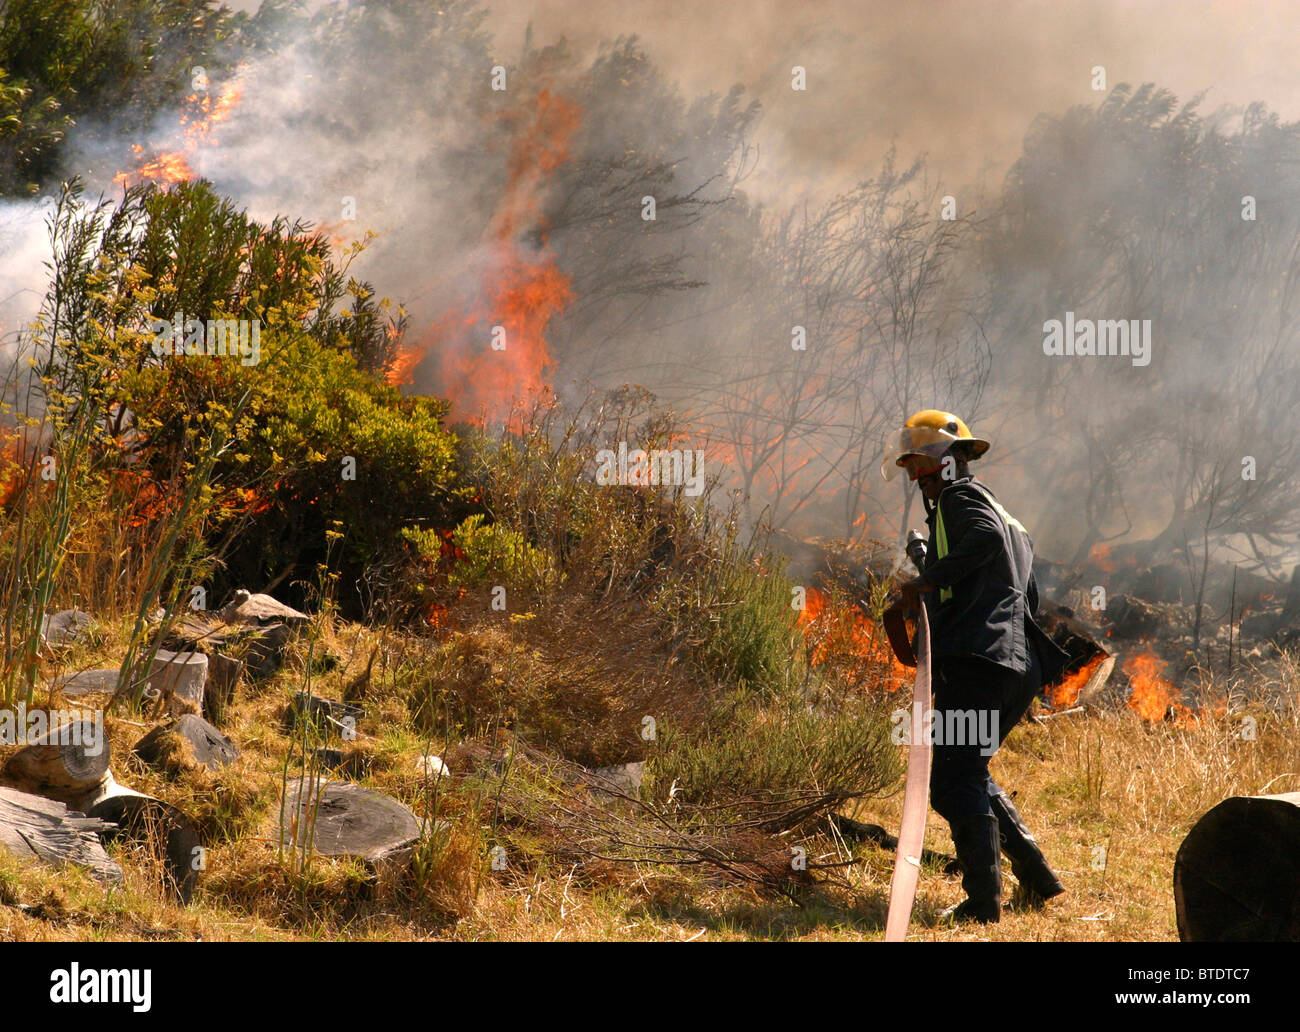 Fire fighter with hosepipe extinguishes flames on Table Mountain Stock Photo